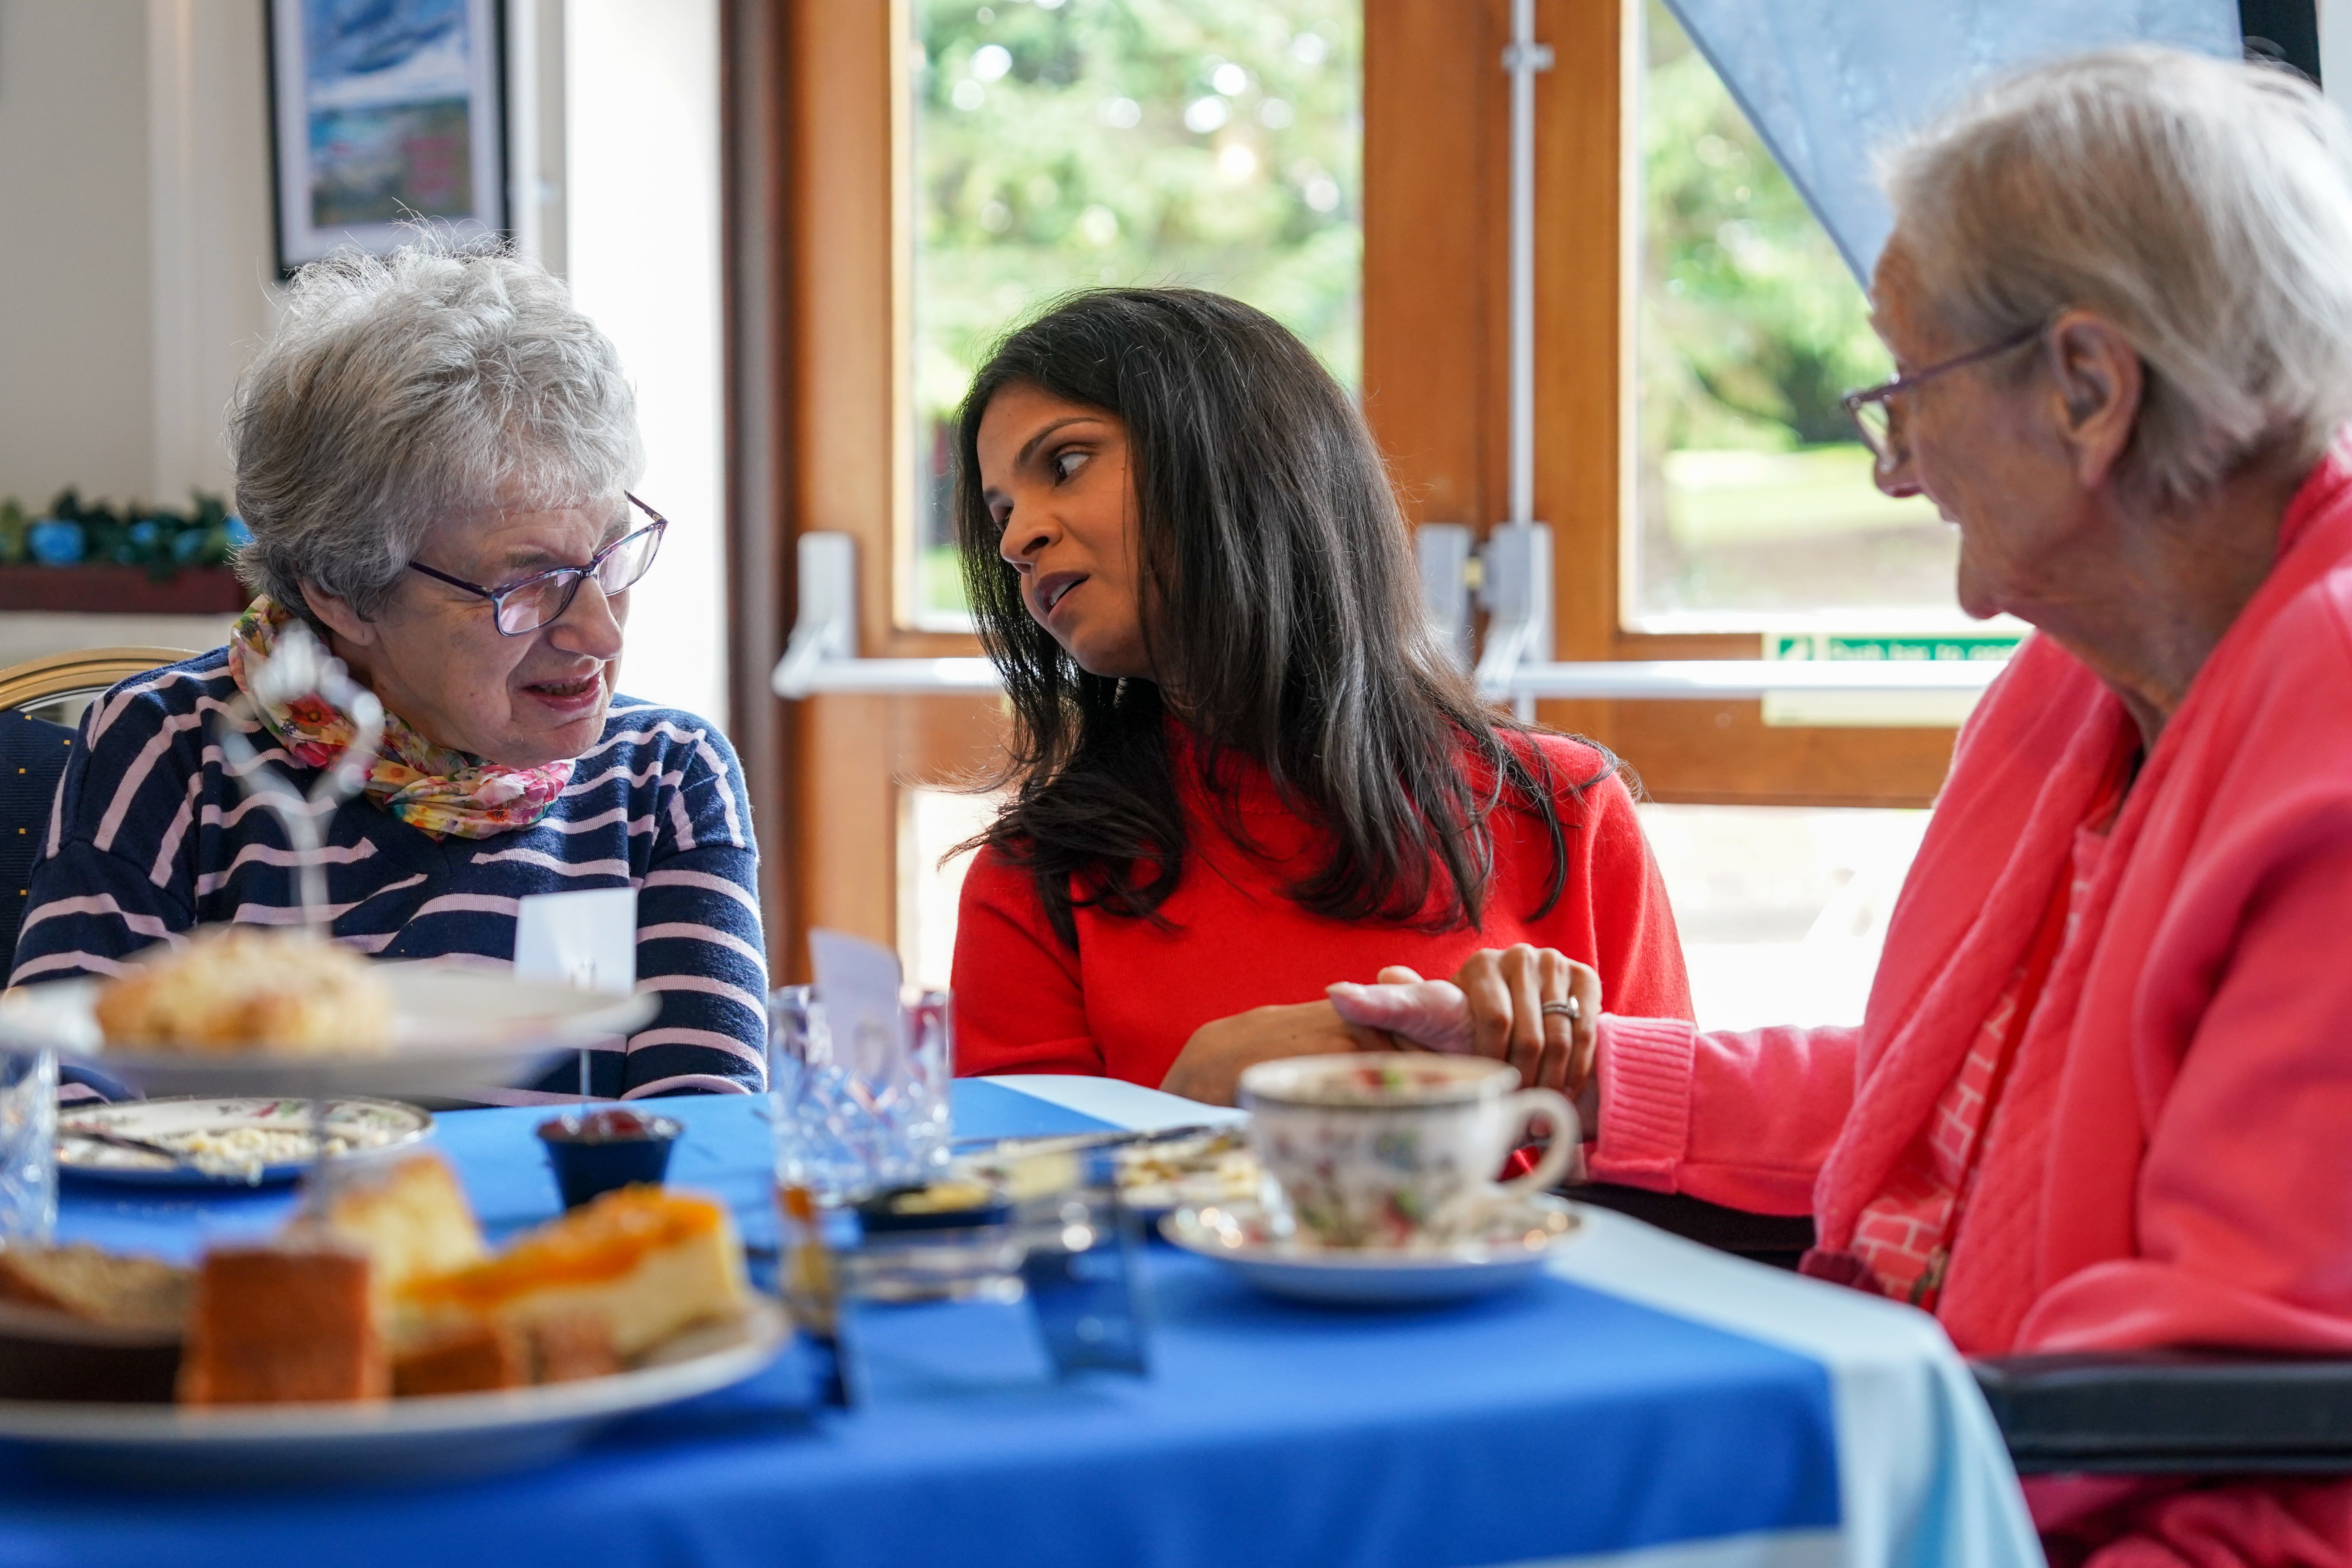 Akshata Murty, the wife of Prime Minister Rishi Sunak, meets with residents during a visit to a Royal British Legion care facility